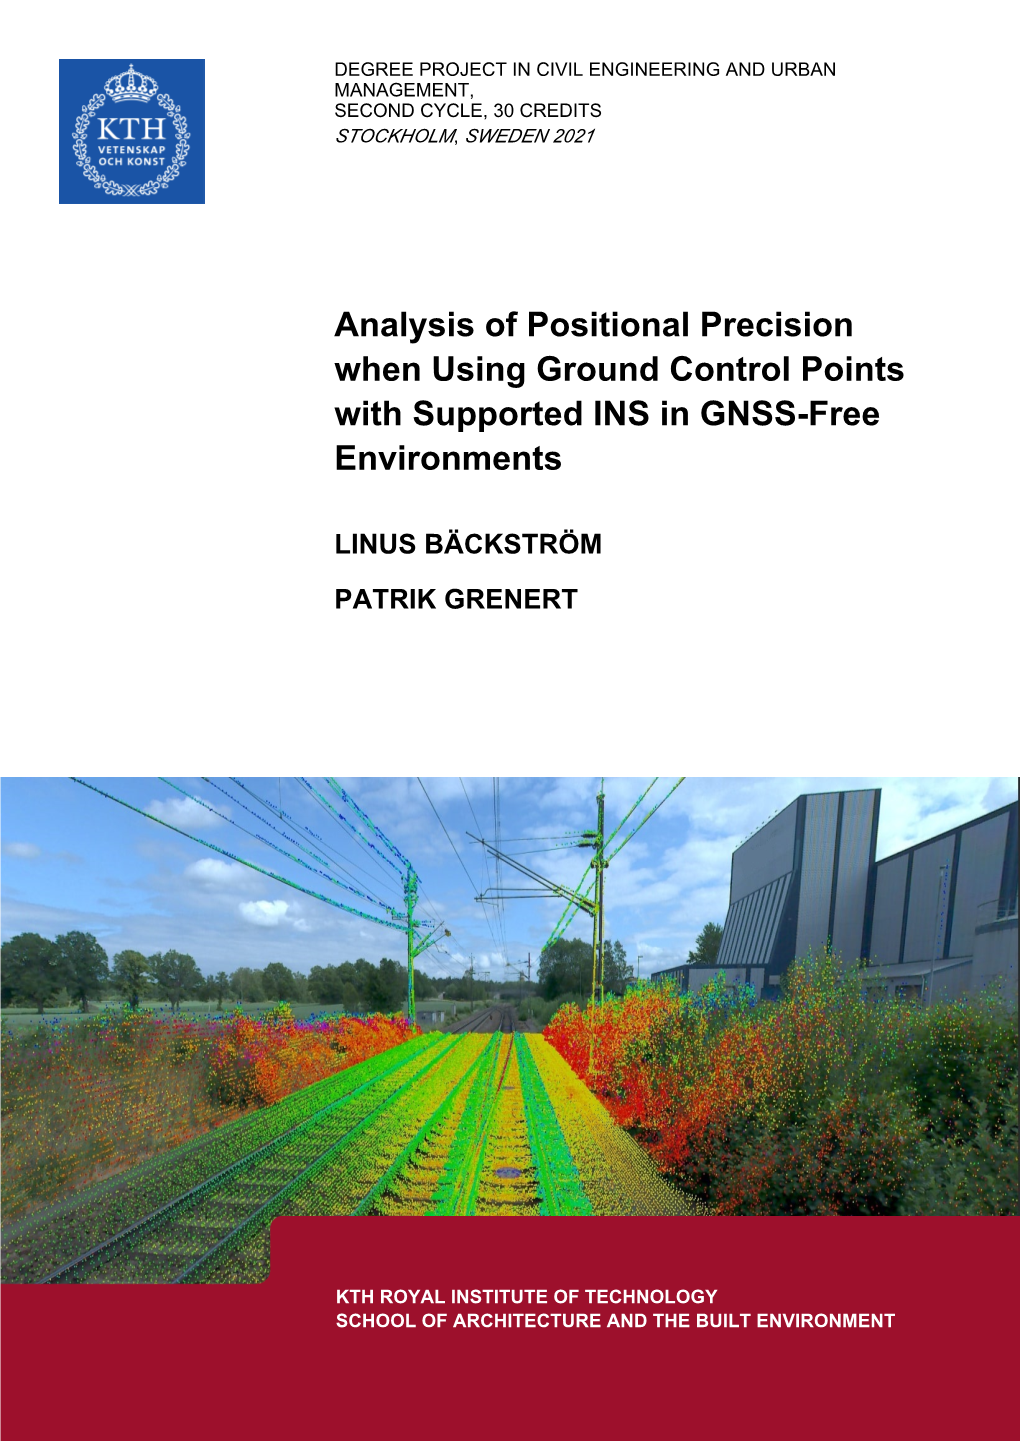 Analysis of Positional Precision When Using Ground Control Points with Supported INS in GNSS-Free Environments